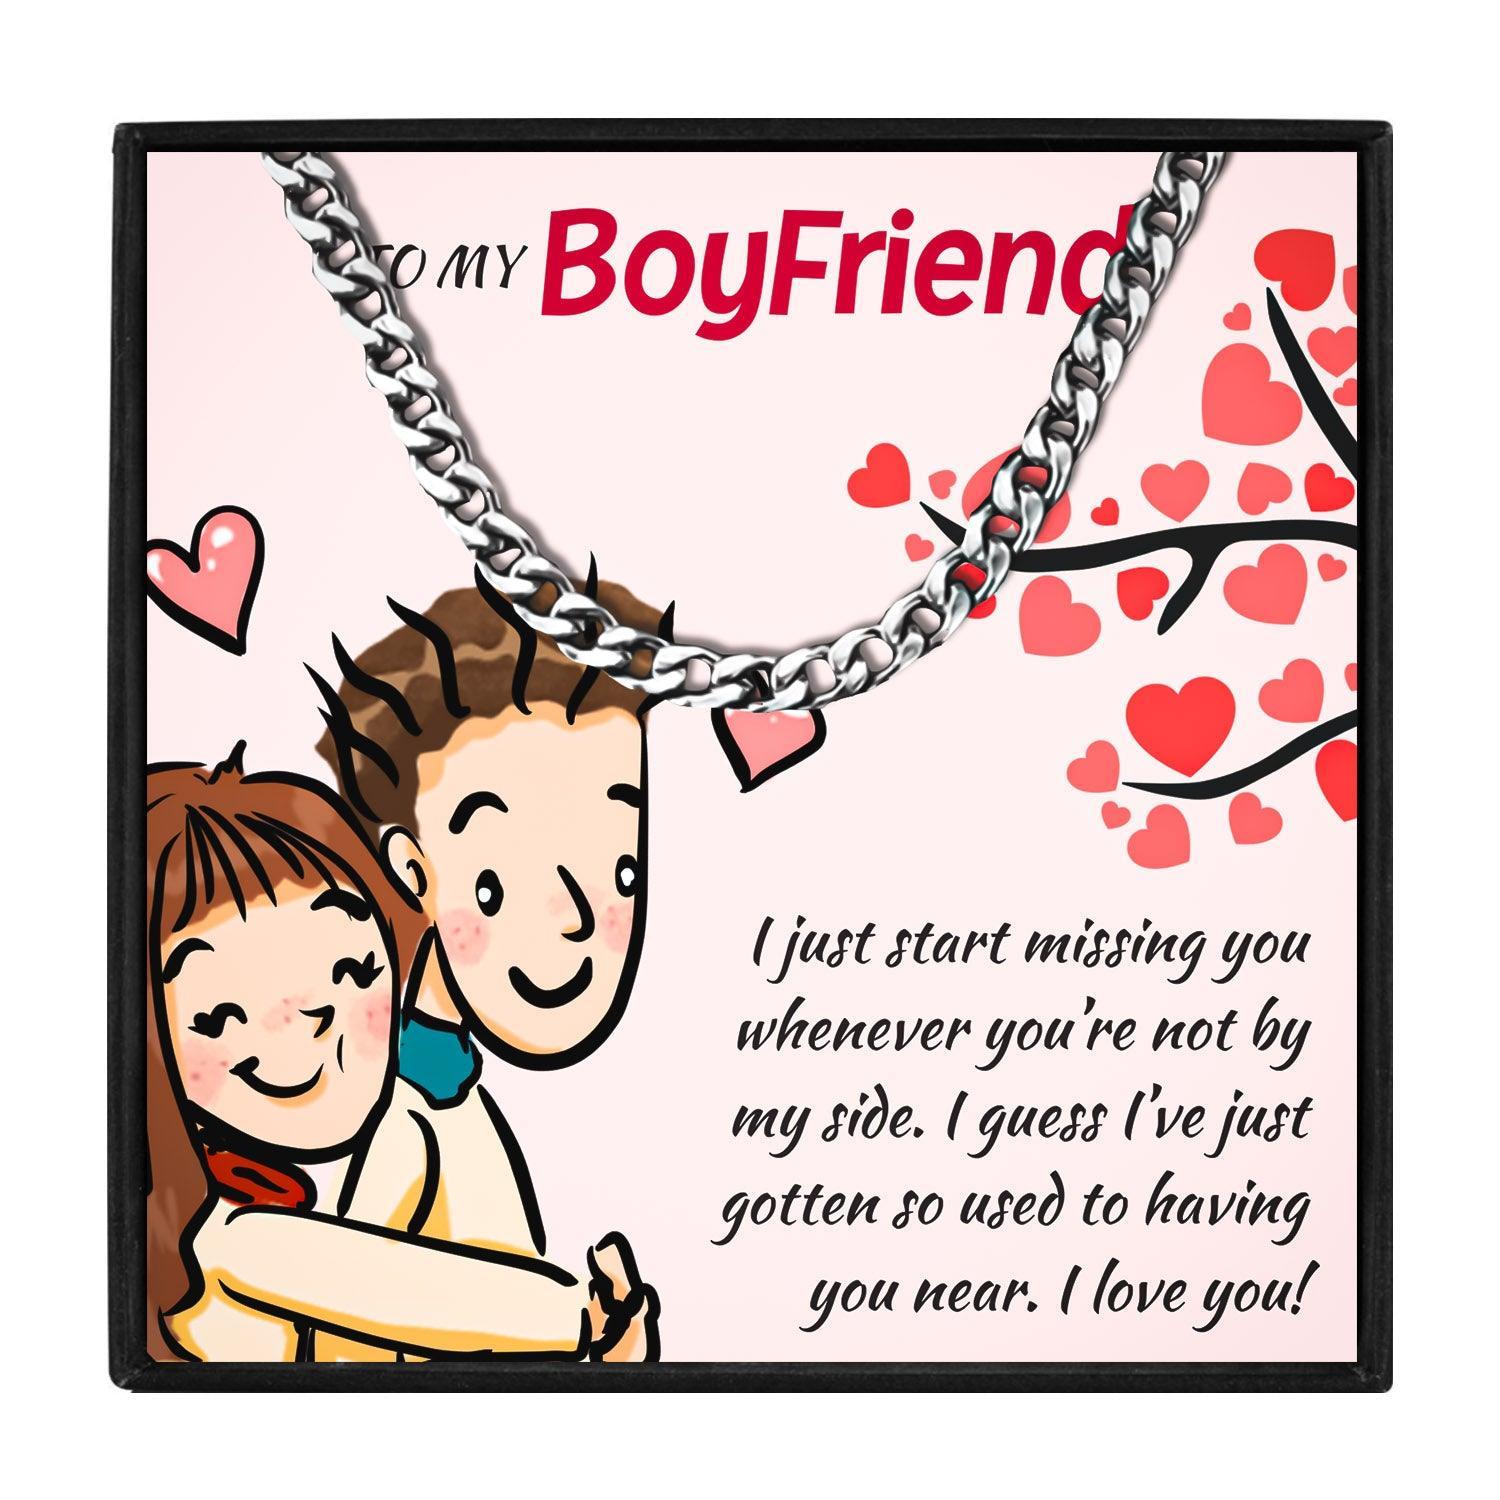 Long Distance Necklaces For Boyfriend in 2023 | Long Distance Necklaces For Boyfriend - undefined | Boyfriend Chain, boyfriend necklace, Chain Necklace for boyfriend, necklace for boyfriend | From Hunny Life | hunnylife.com